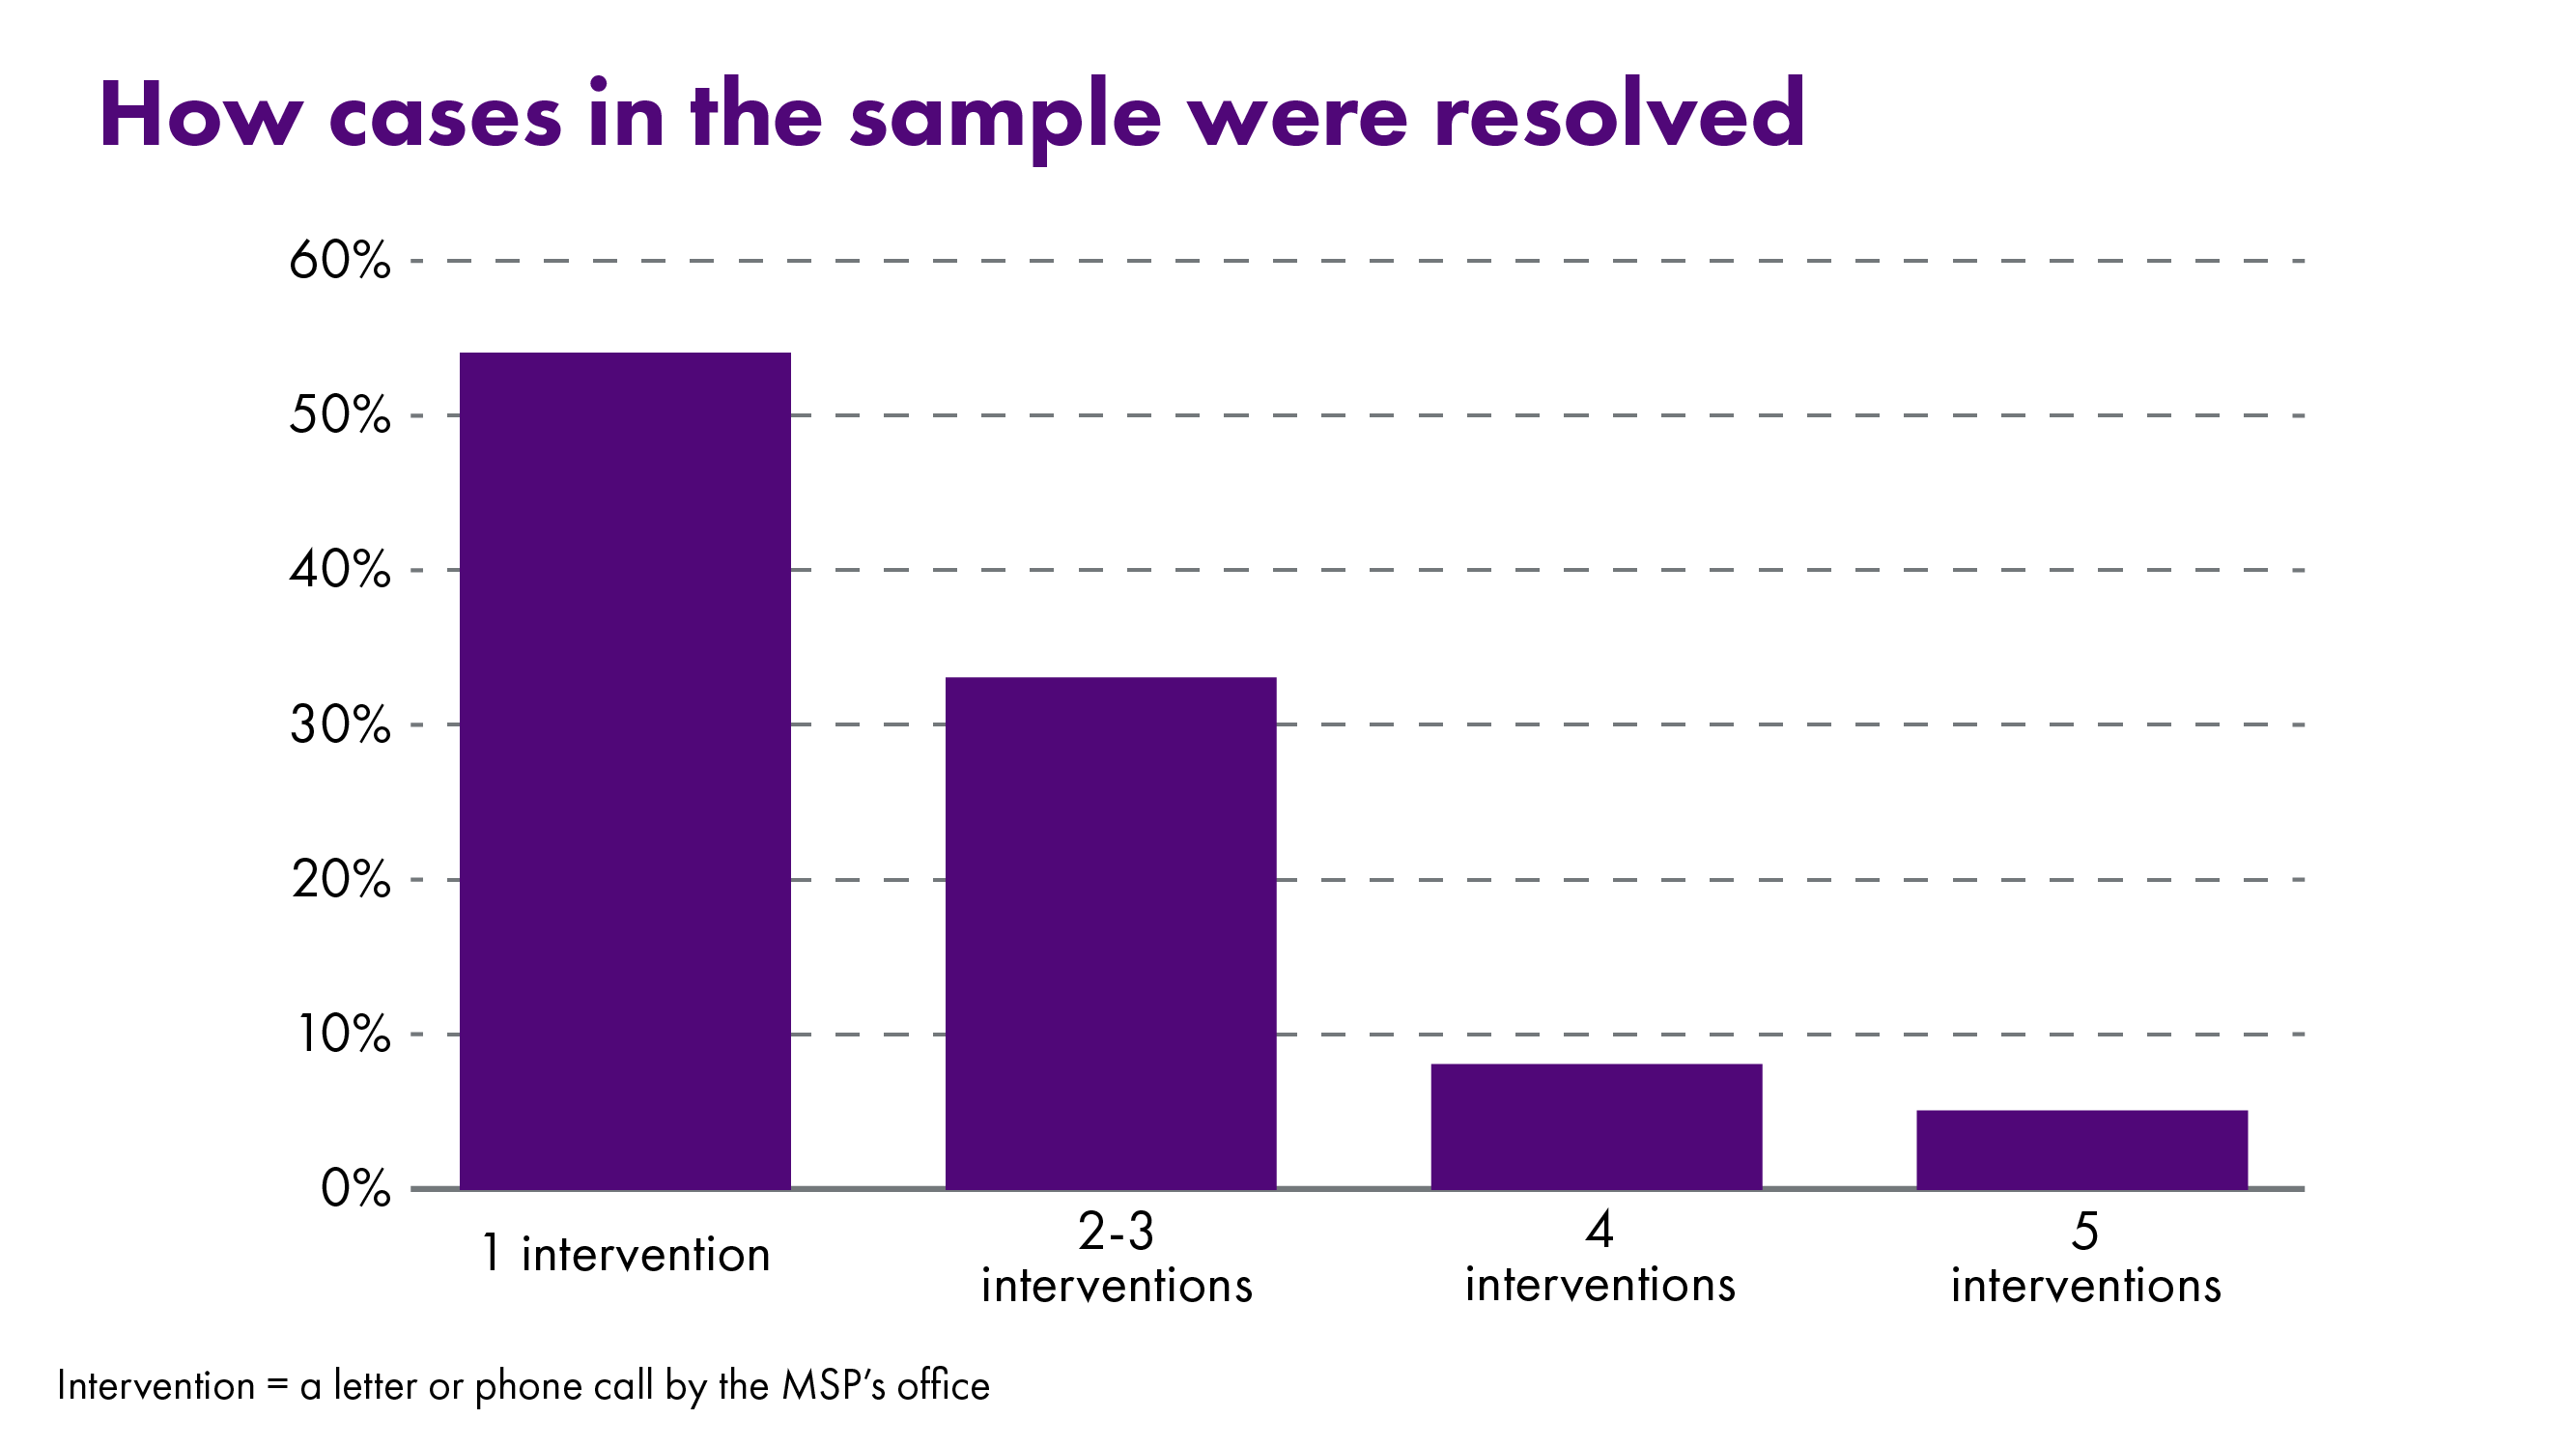 Infographic looking at how constituents' cases are resolved - 54% are resolved after one intervention, 33% need two to three interventions, 8% require four interventions and 5% require more than five interventions.